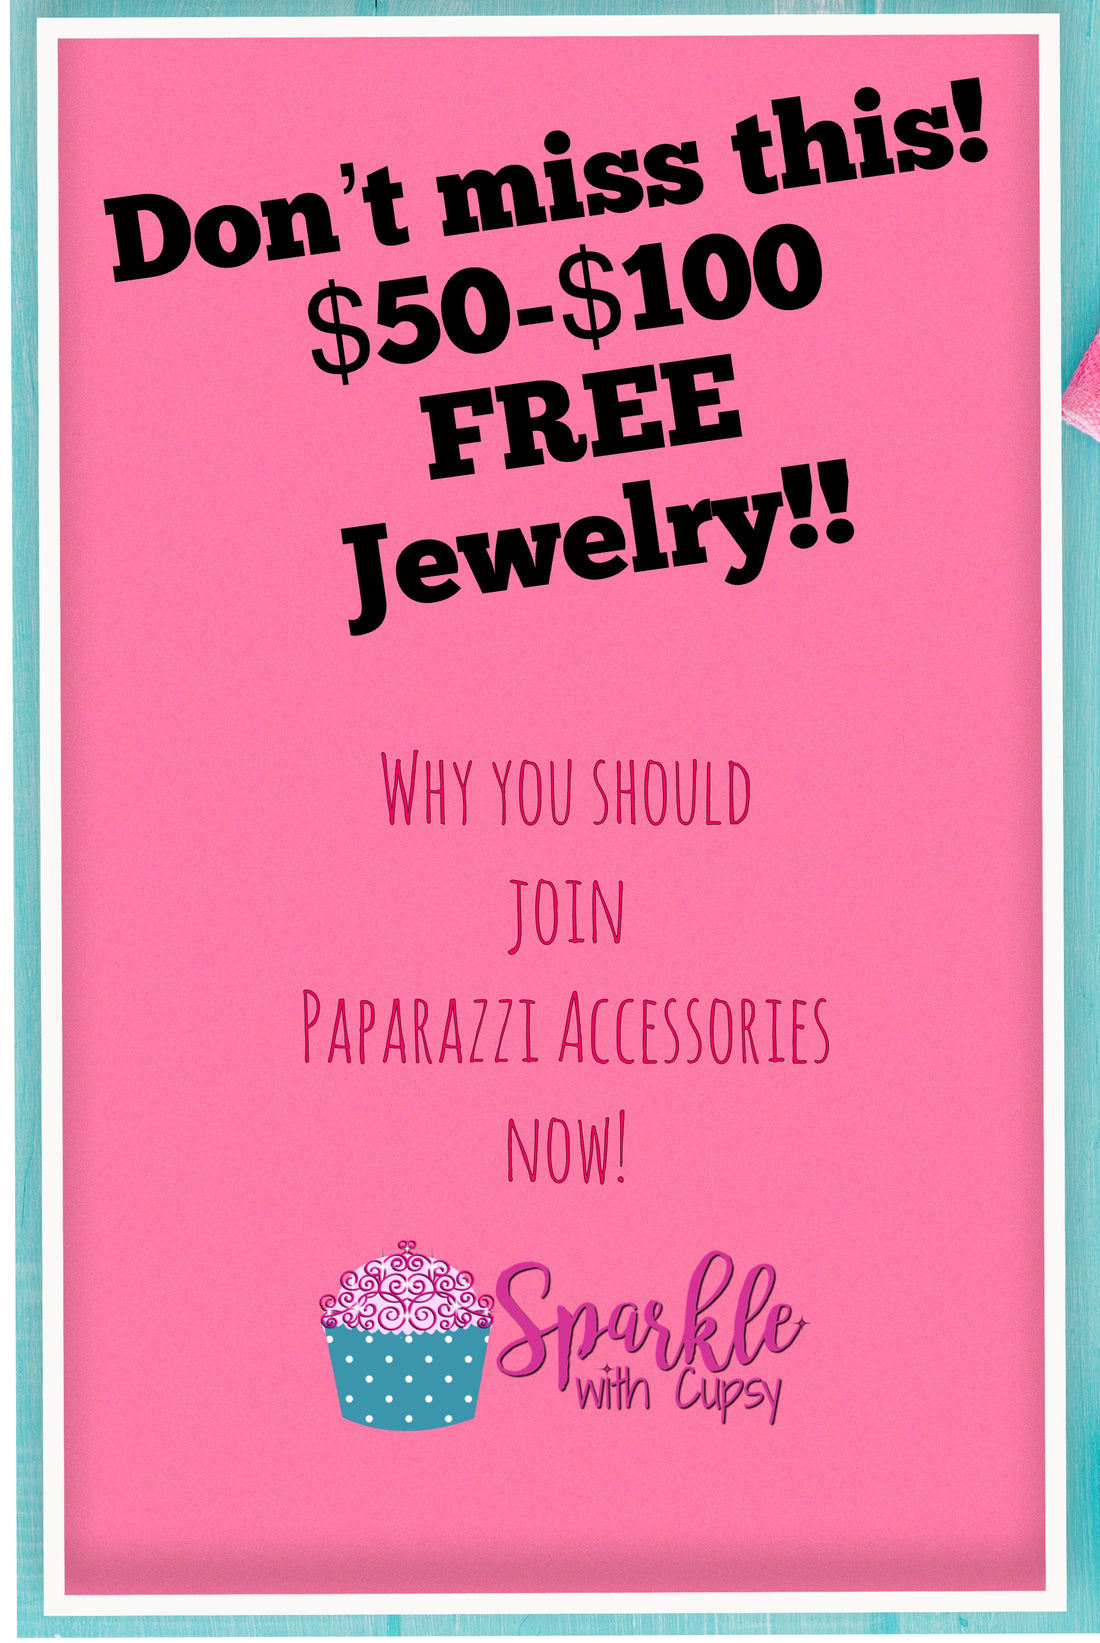 Why now is the time to join Paparazzi Accessories?!